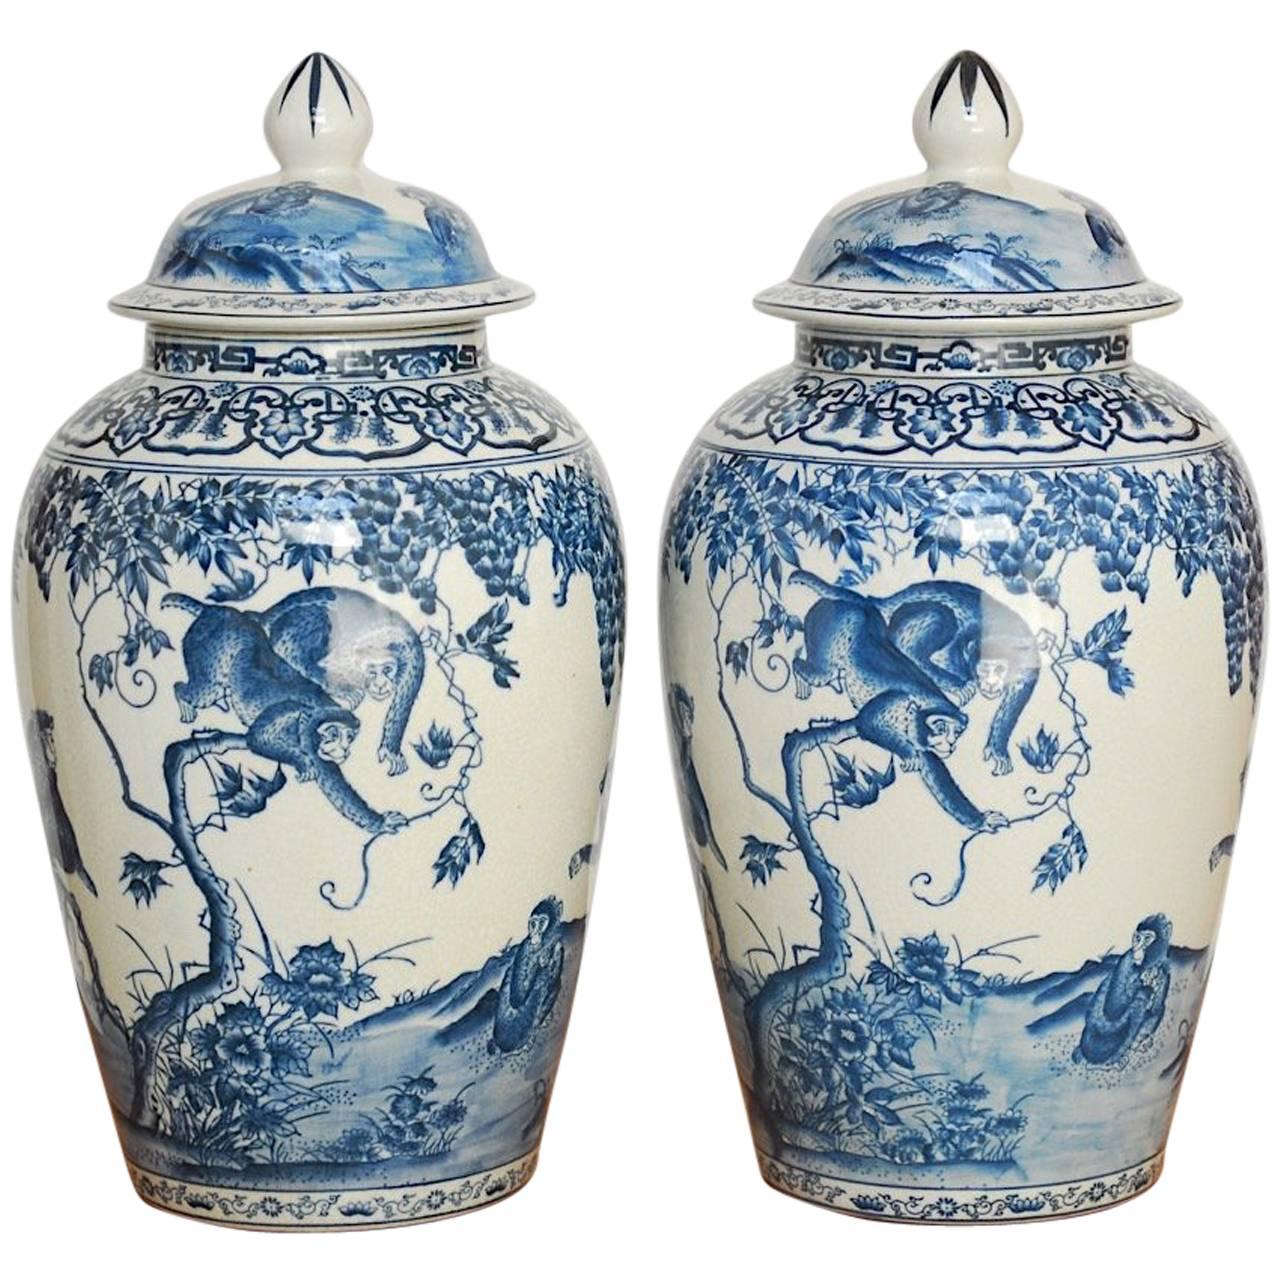 Chinoiserie Blue and White Ginger Jars with Monkeys